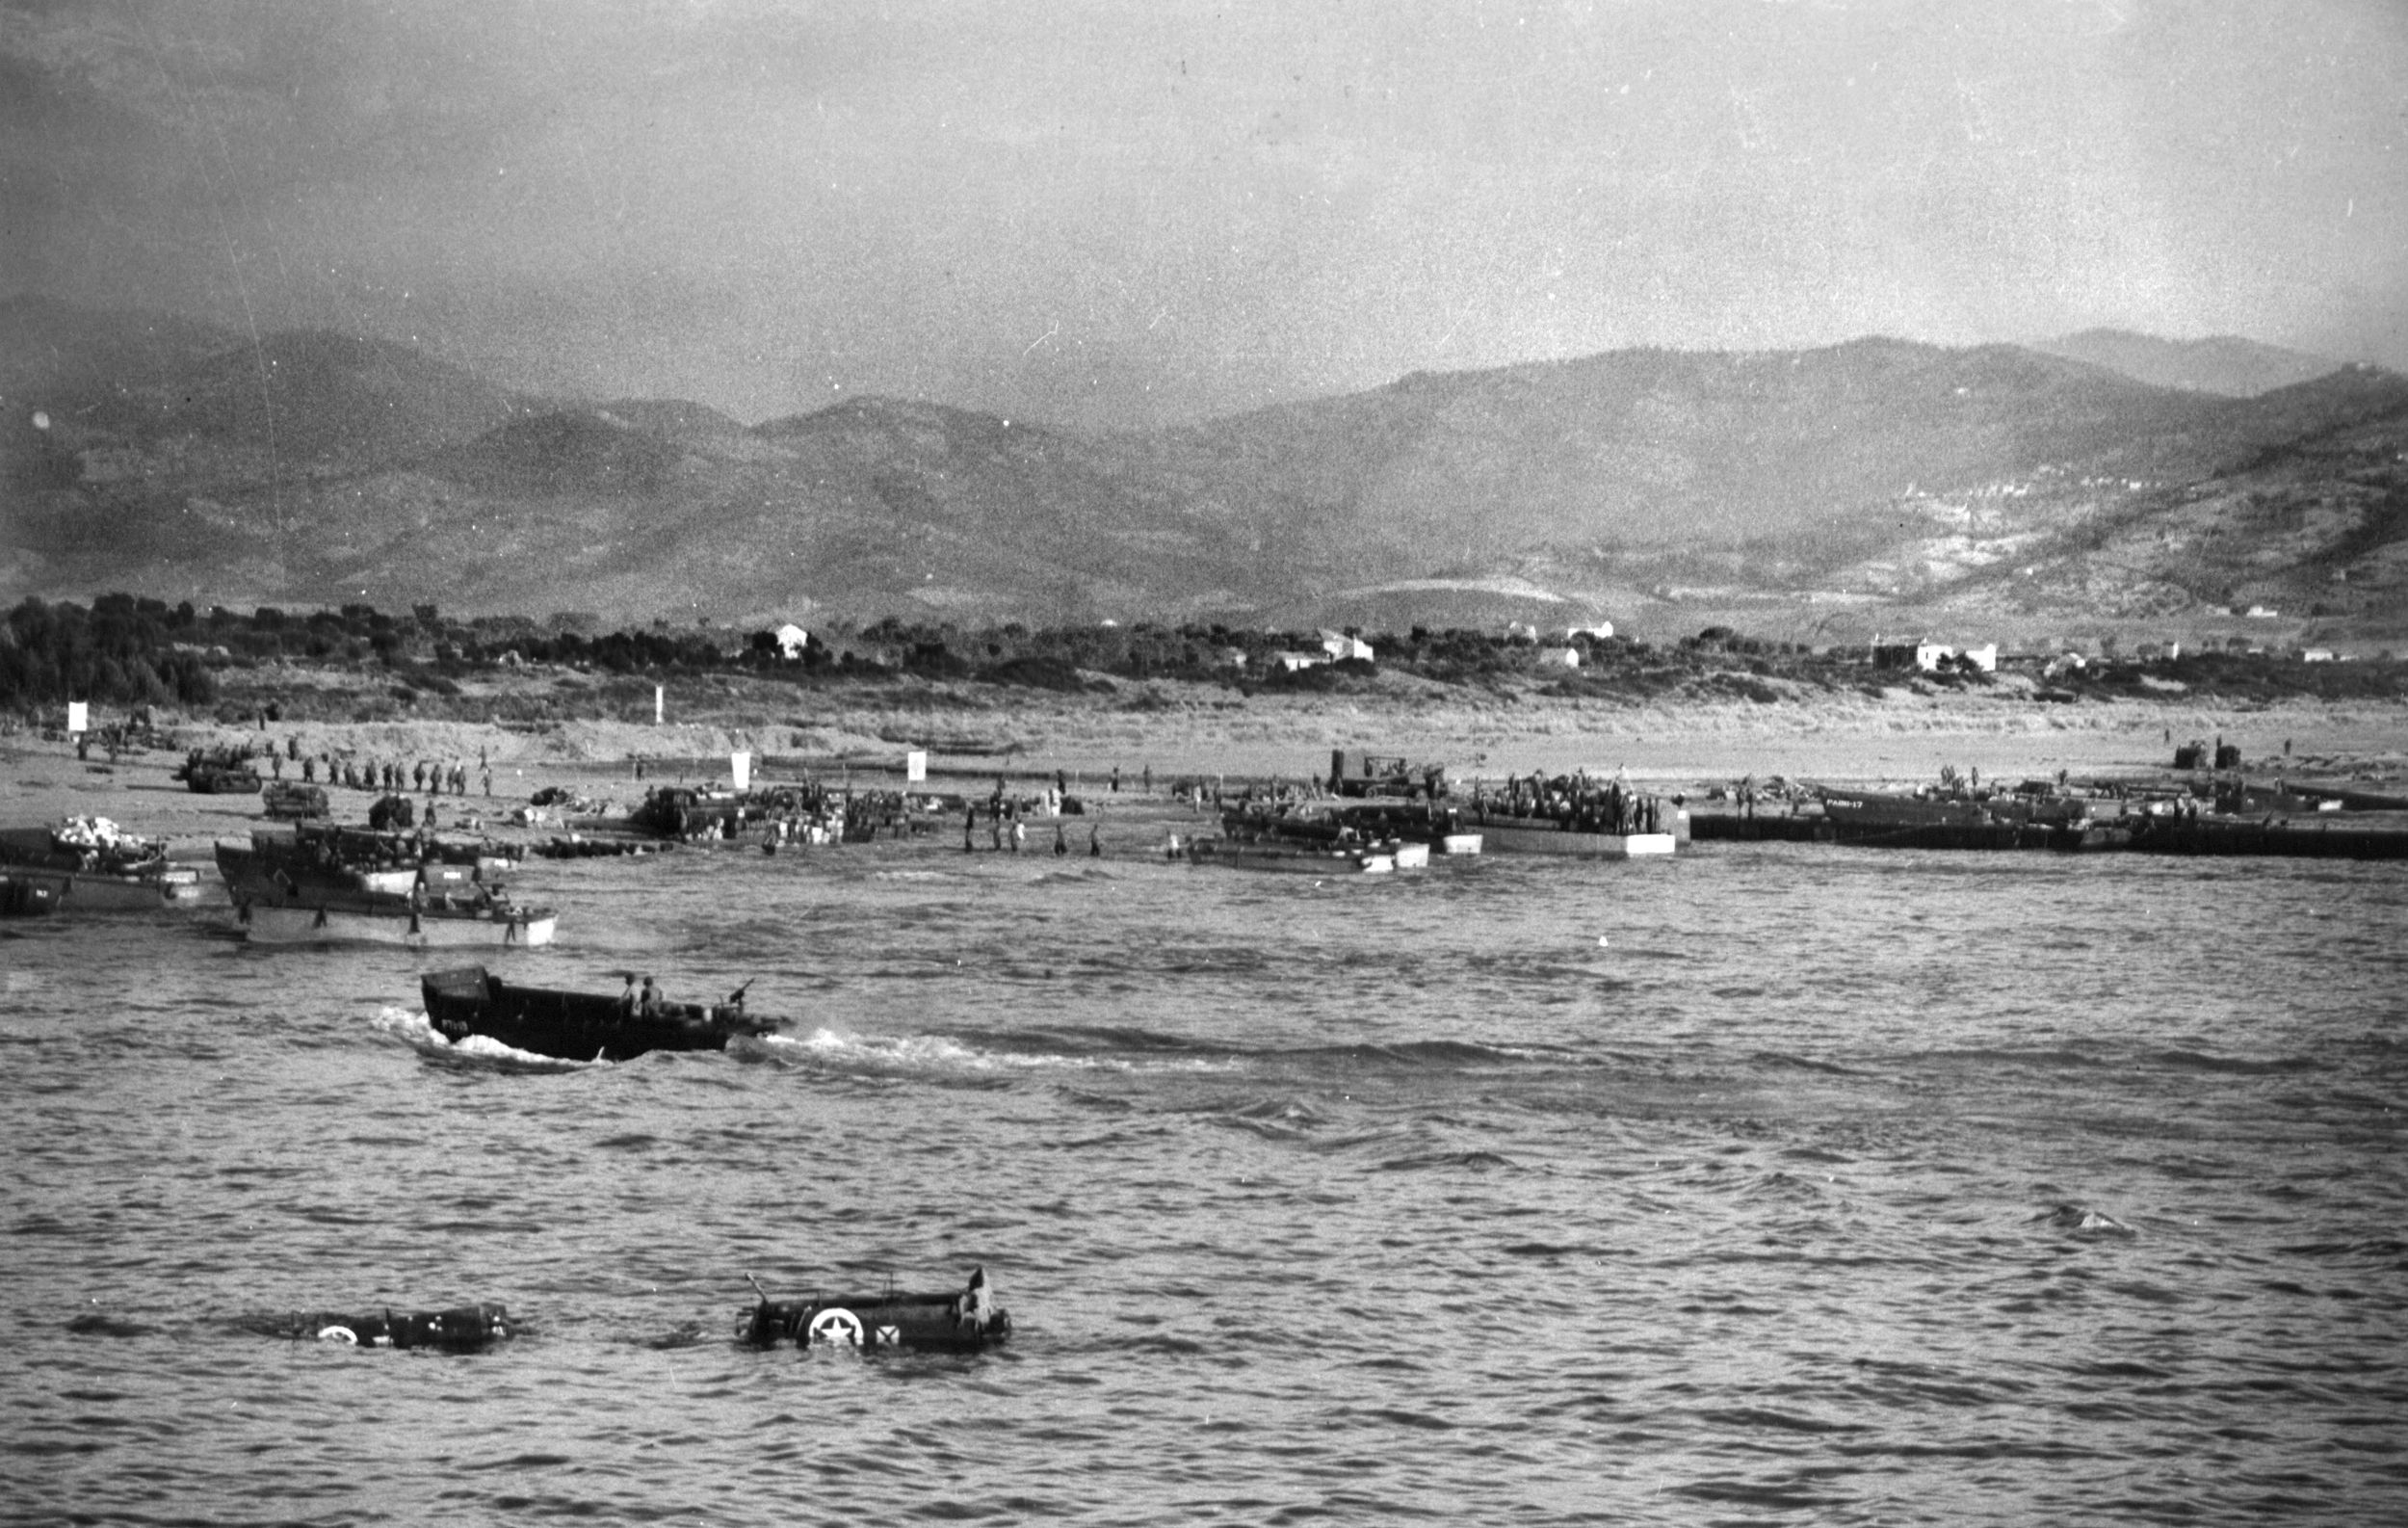 The Germans contested the Salerno landings vigorously, prompting Allied commanders to order the 82nd Airborne Division (504th PIR and 505th PIR) to jump in as reinforcements. Elements of the 509th Parachute Infantry Battalion were inserted behind enemy lines to disrupt troop movements and communications.